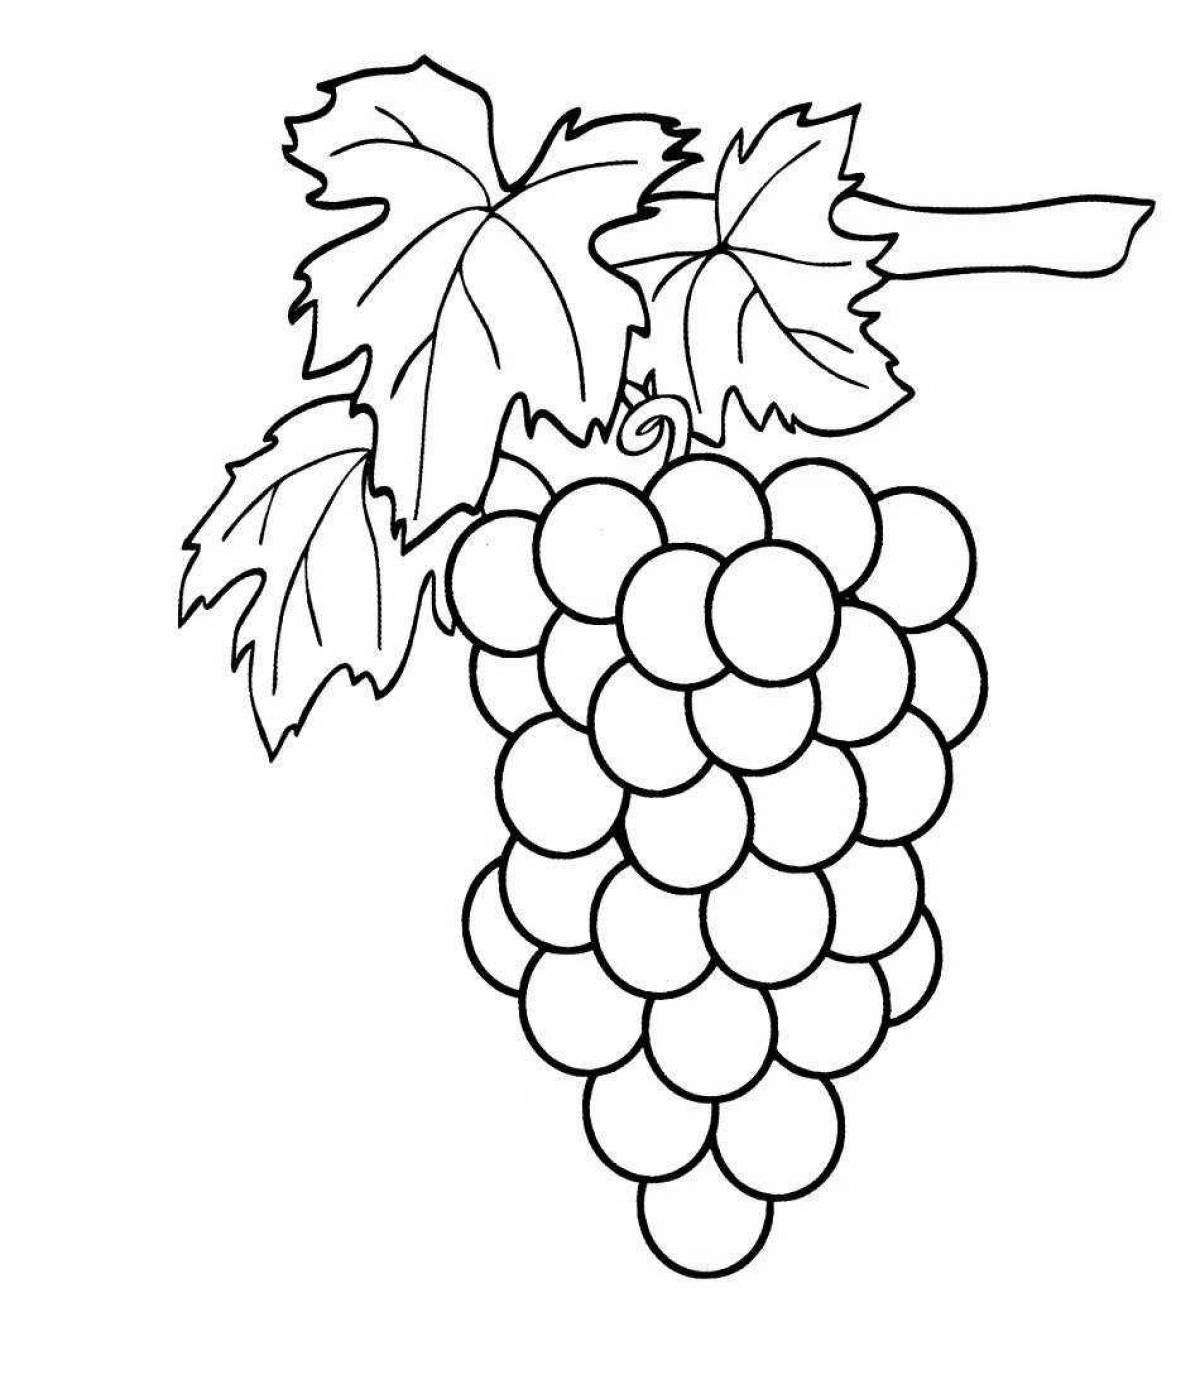 Rampant grapes coloring pages for kids